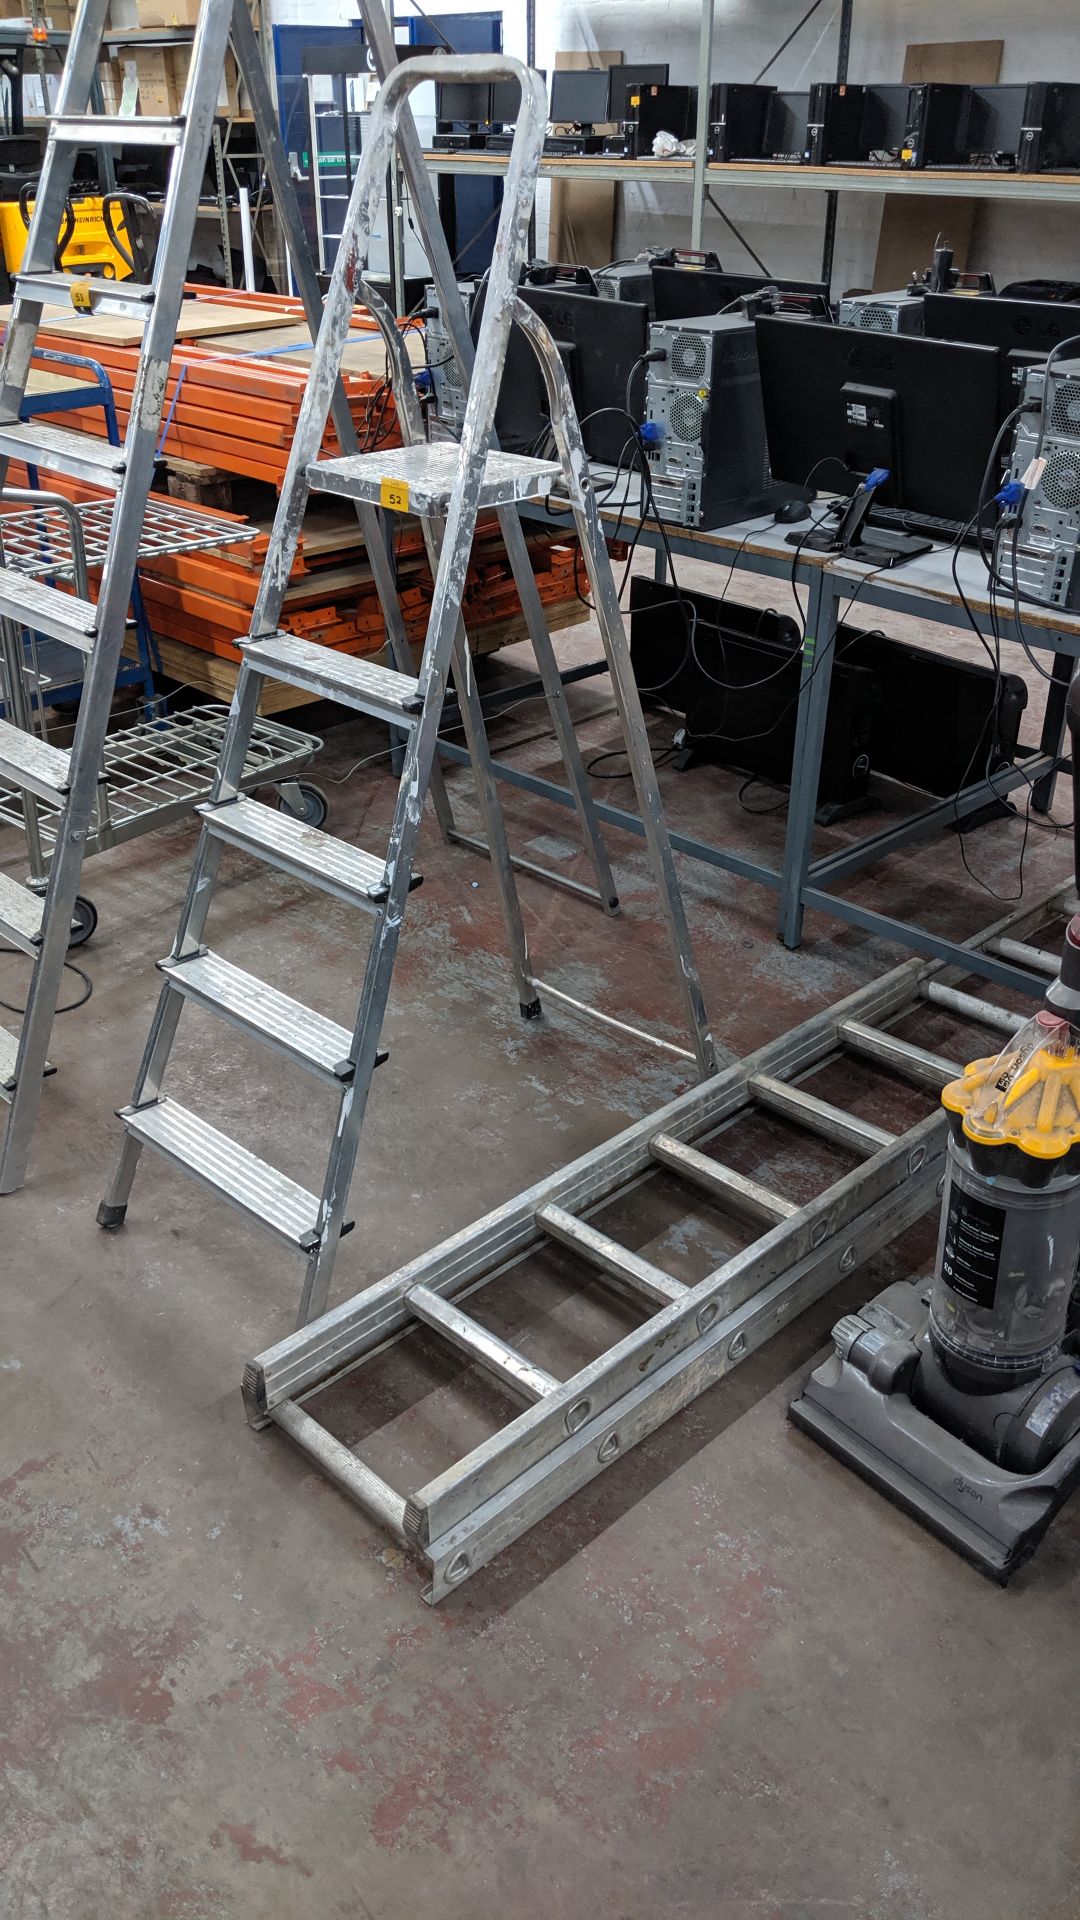 Stepladders plus 2 small rung ladders. This is one of a number of lots being sold on behalf of the - Image 2 of 3